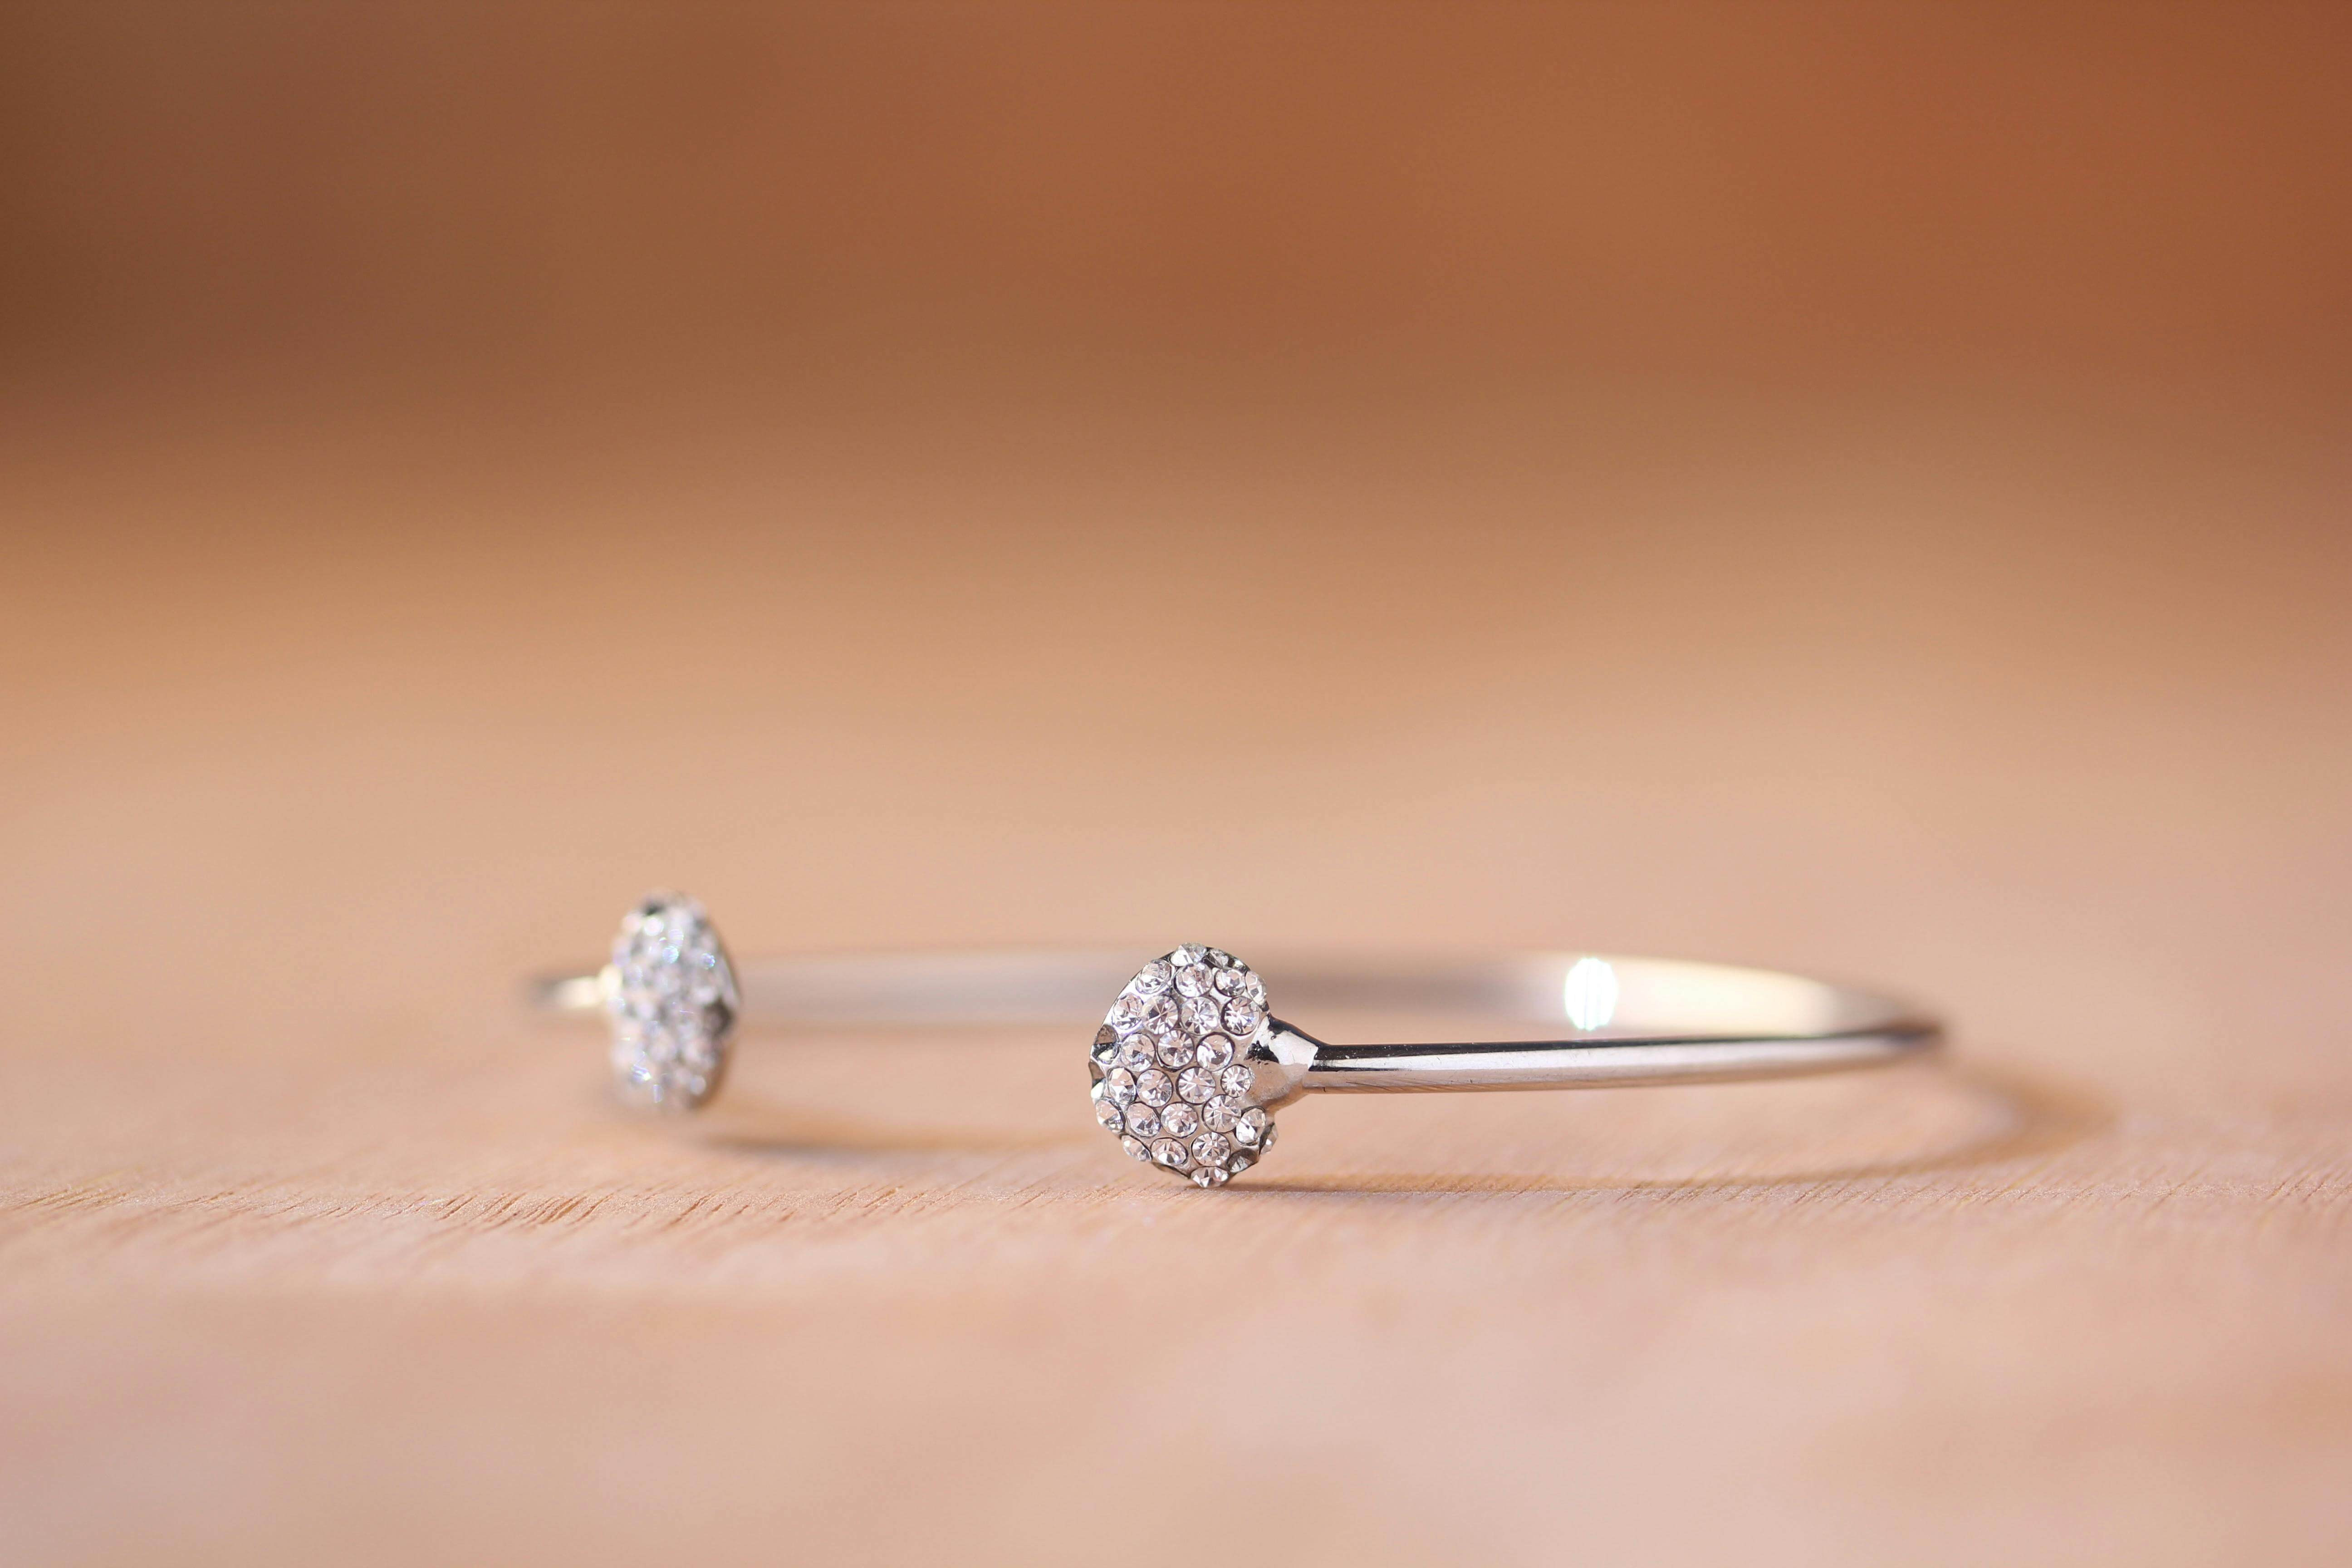 Exquisite detail in high-resolution jewelry product images, capturing the elegance and quality of each piece.